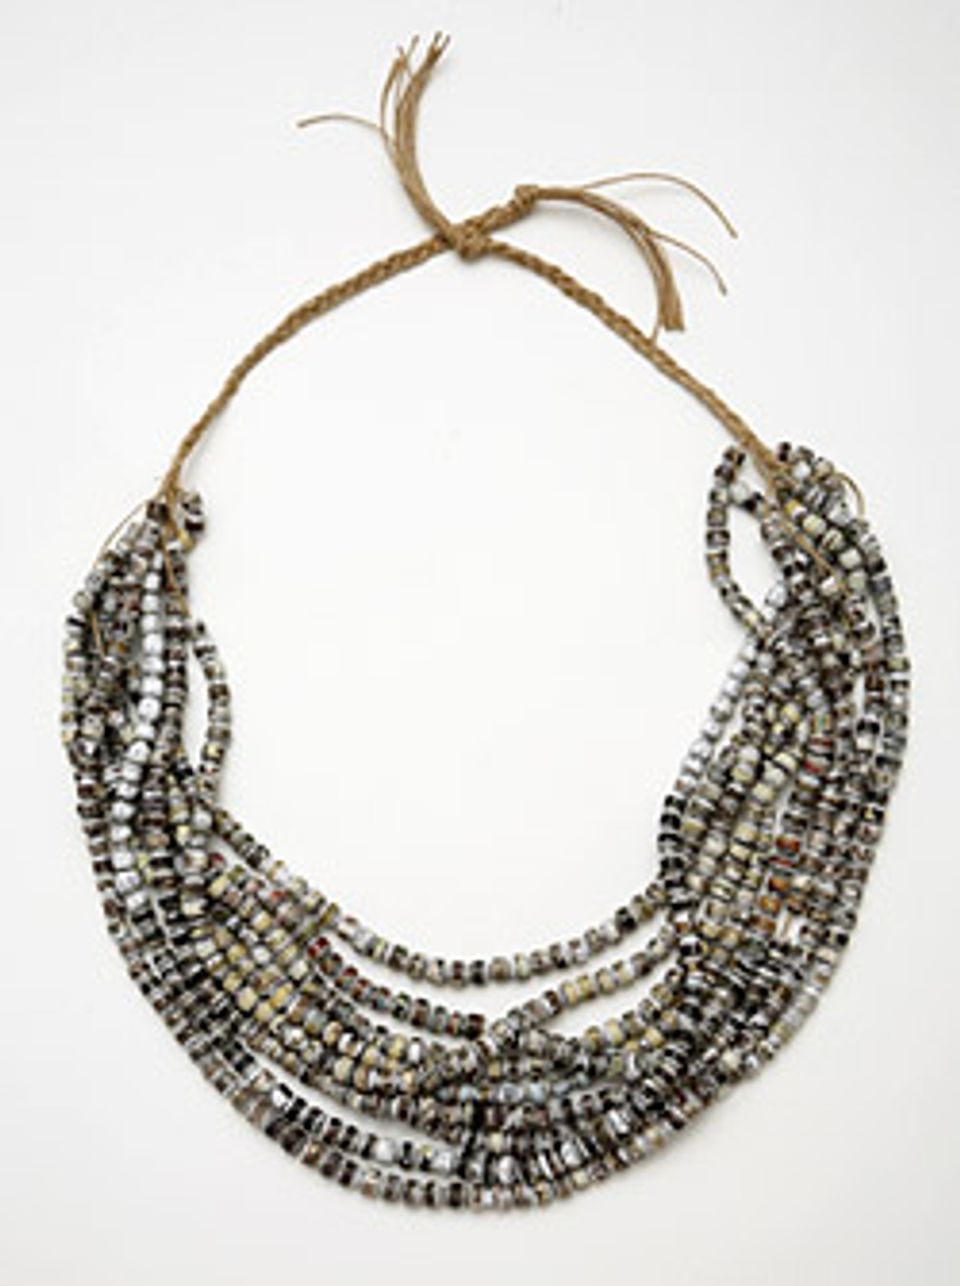 Simryn Gill's Pearls at the Sackler Gallery